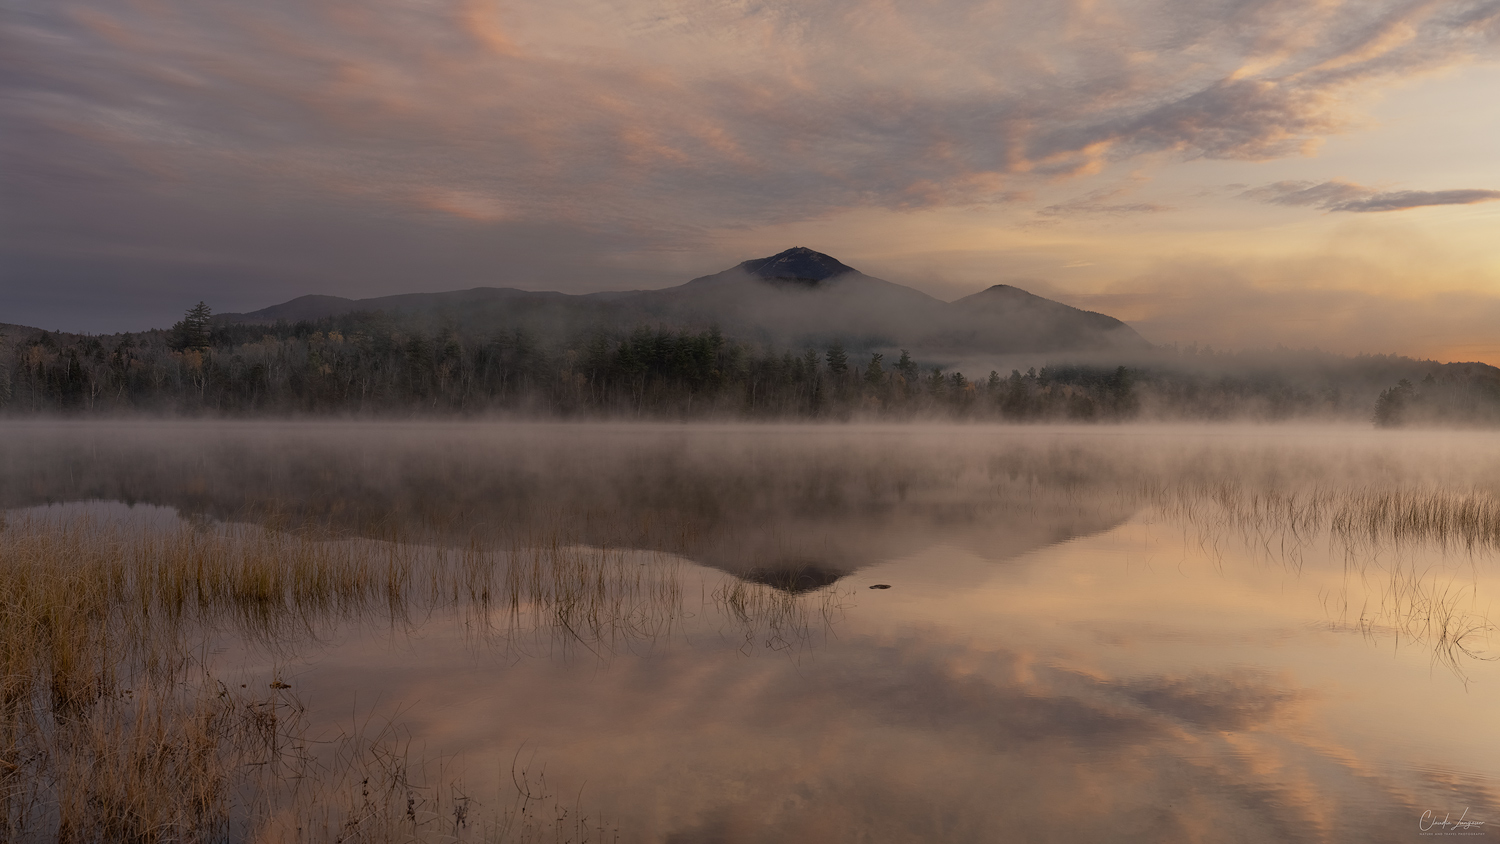 Dramatic sunrise at Connery Pond in the Adirondacks of New York.